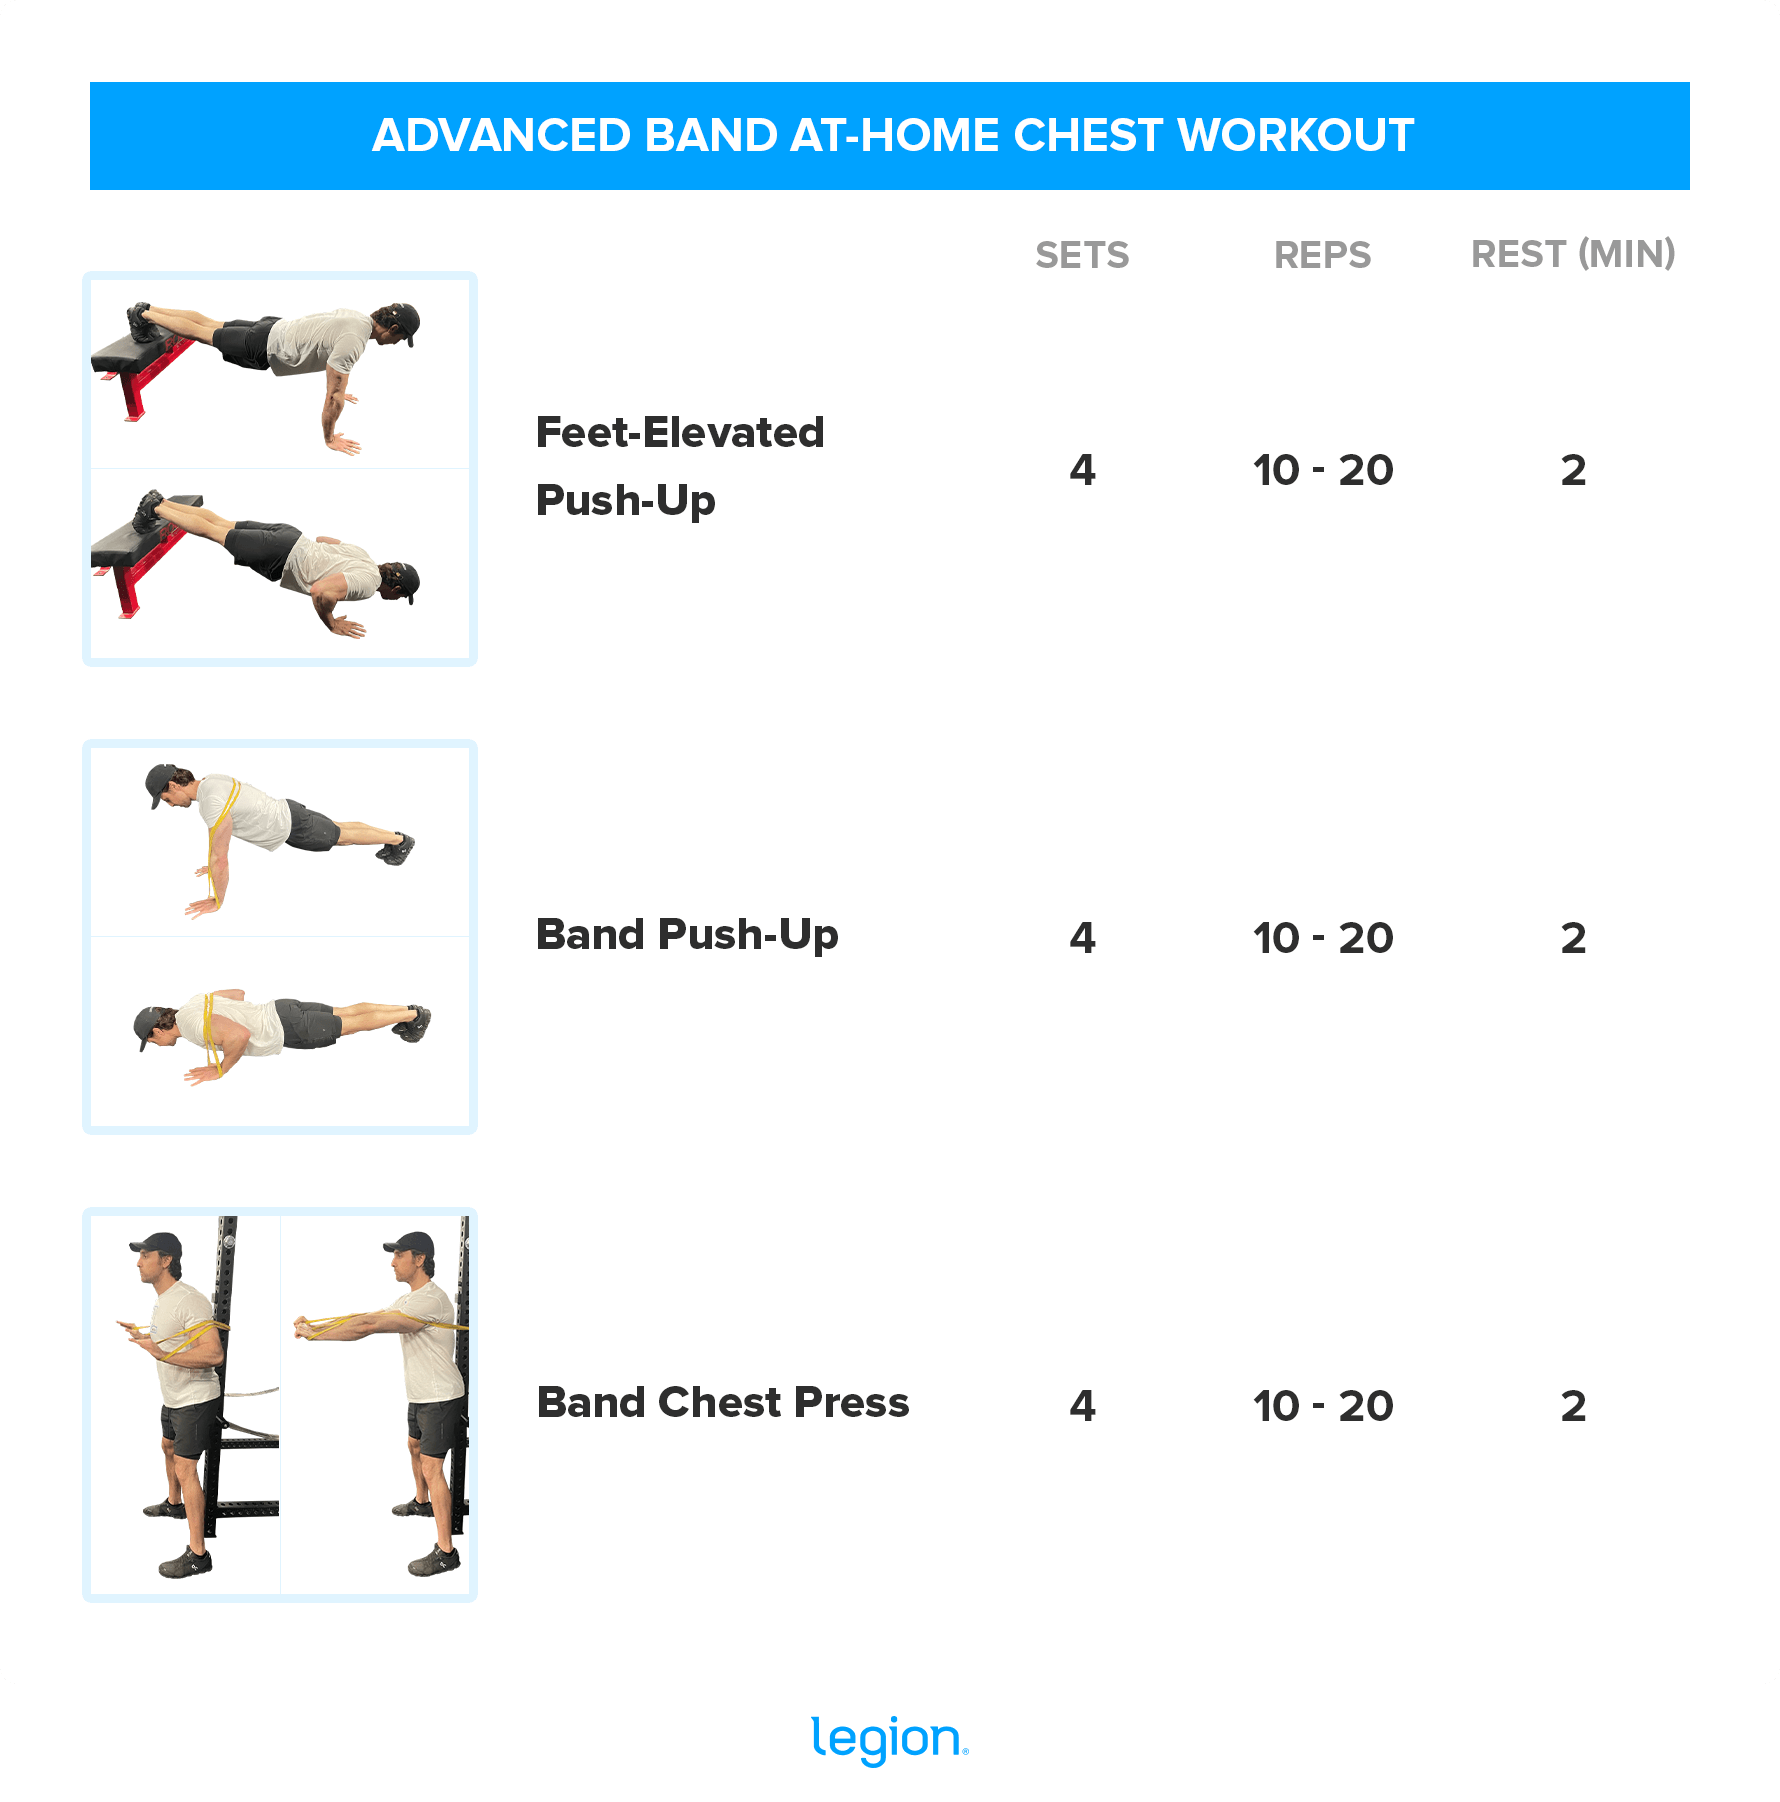 ADVANCED BAND AT-HOME CHEST WORKOUT